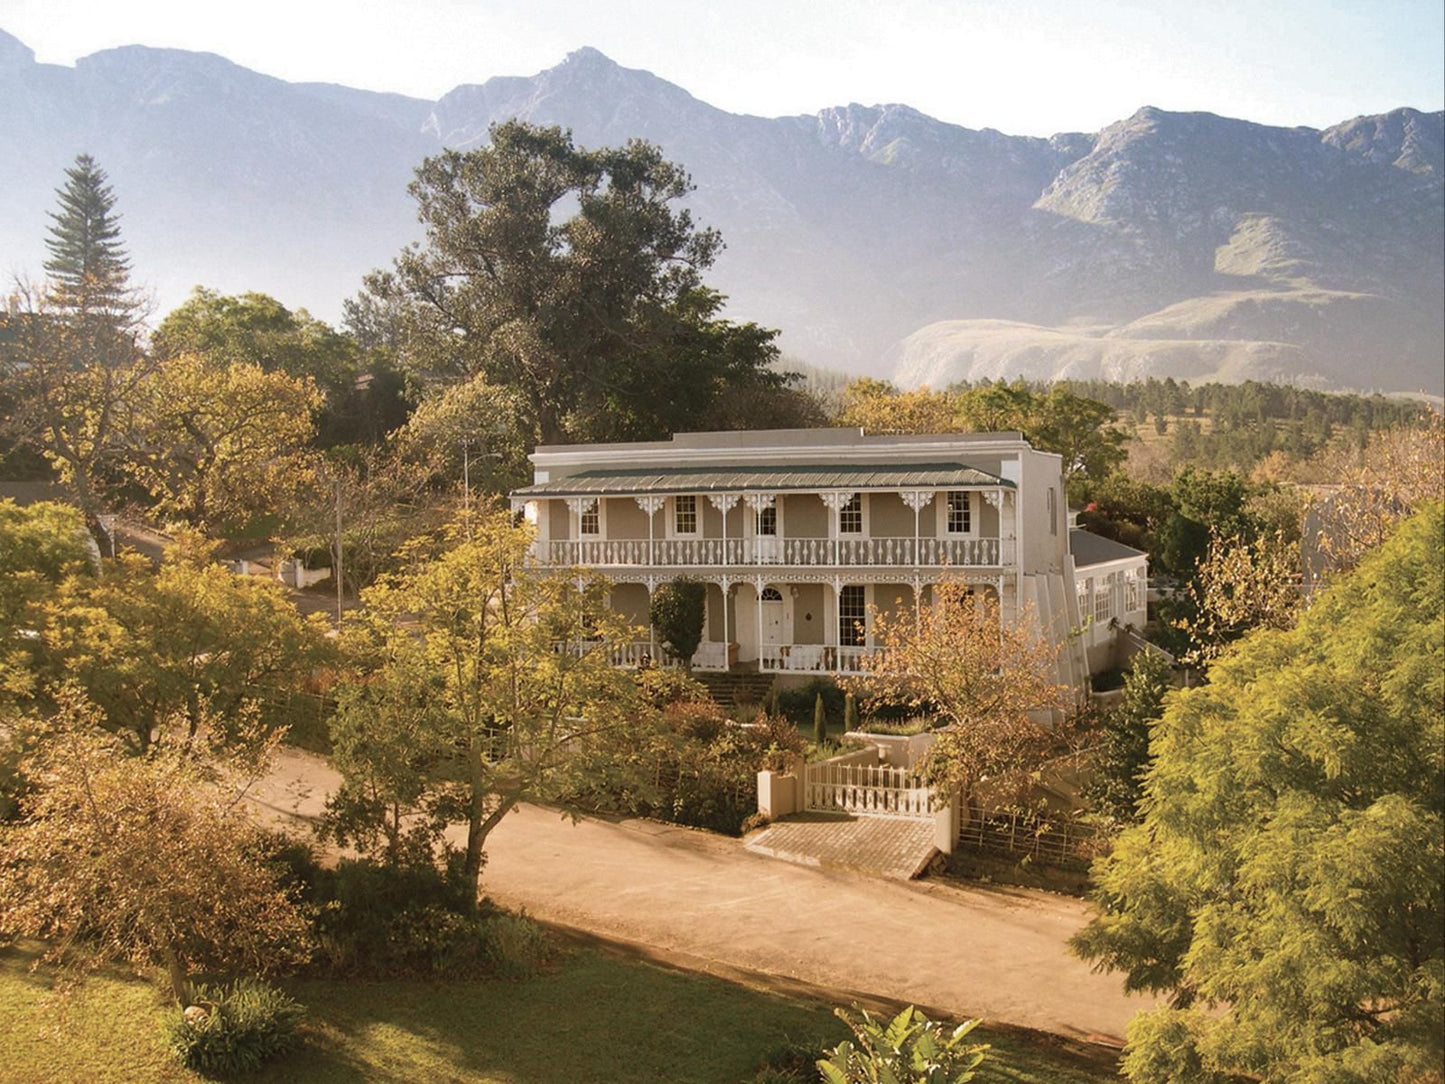 Schoone Oordt Country House Swellendam Western Cape South Africa House, Building, Architecture